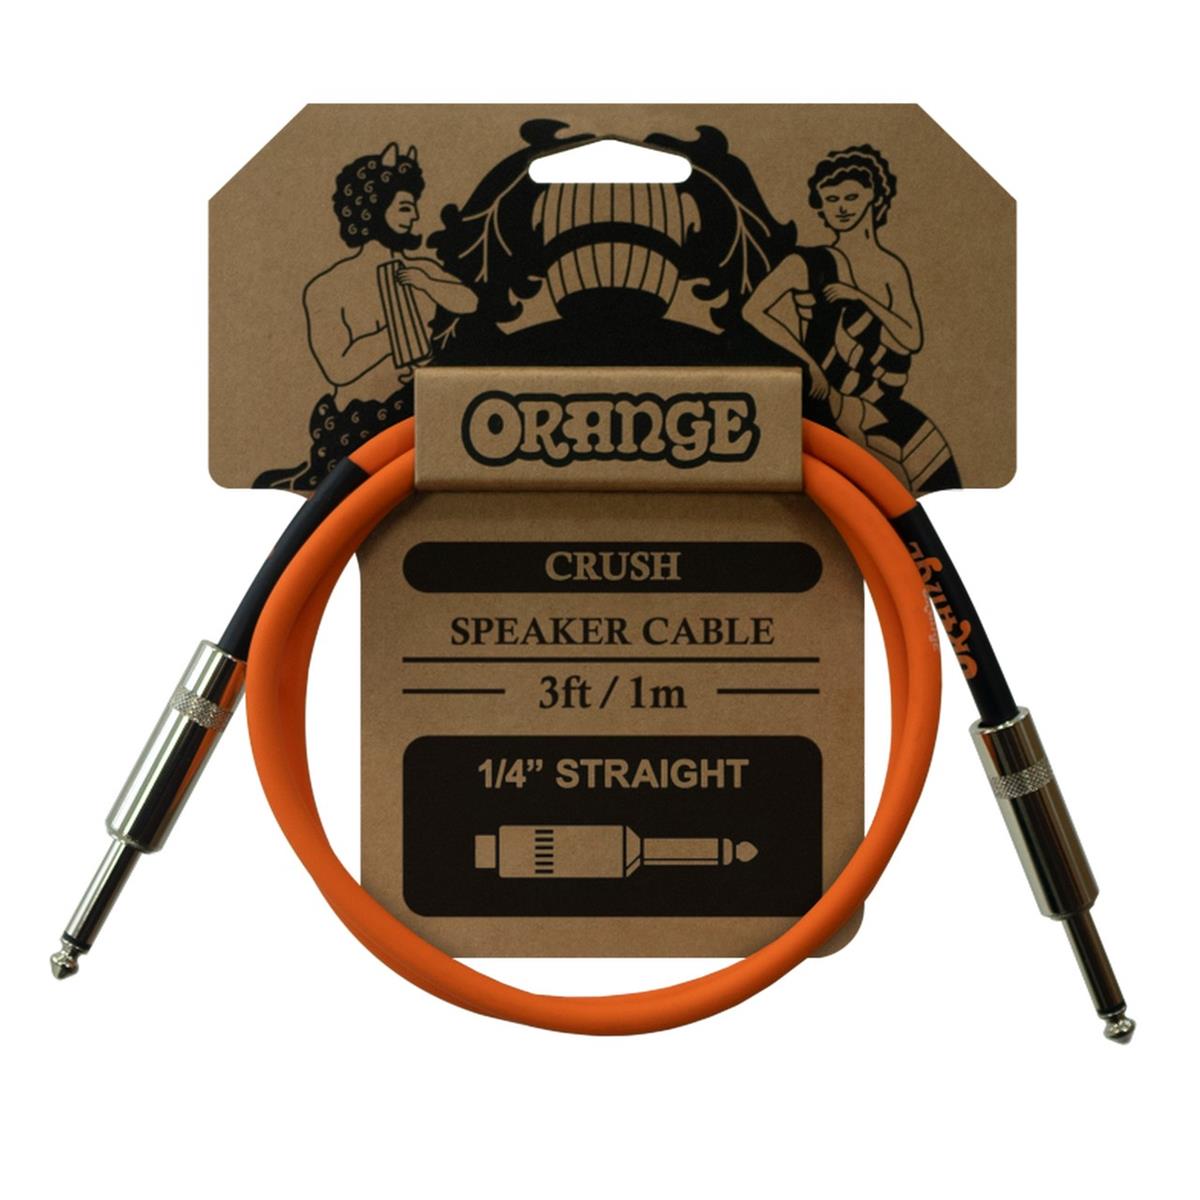 Image of Orange Crush 3' Speaker Cable with Jack to Jack Connectors